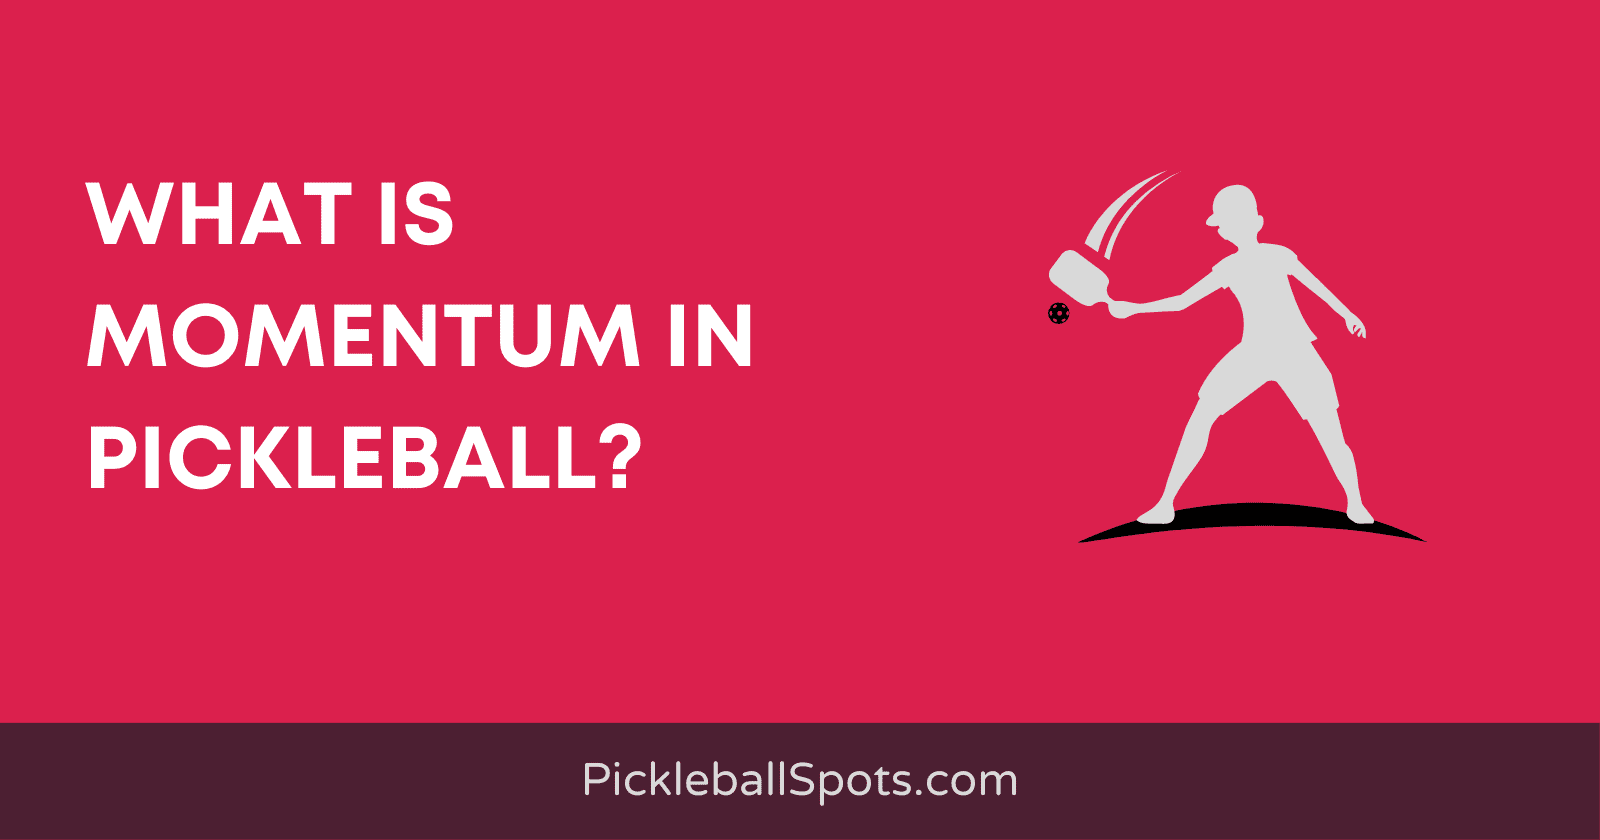 What Is Momentum In Pickleball